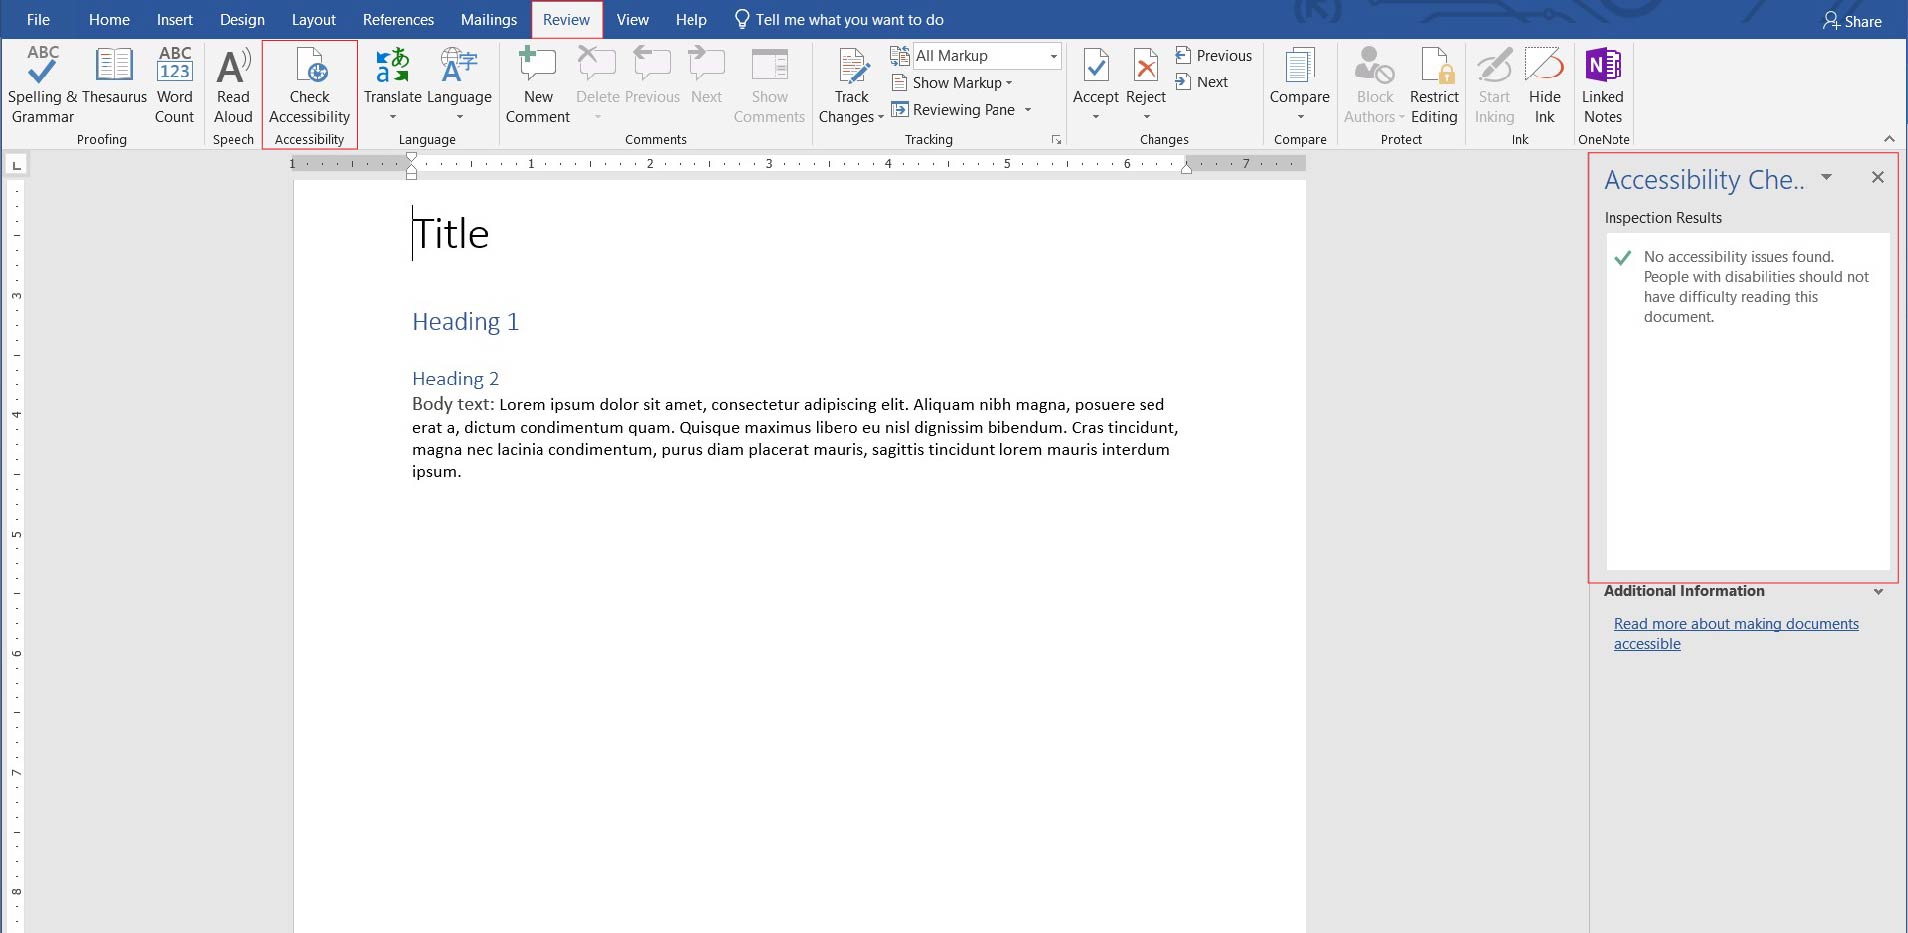 An example of the Accessibility Checker function in Microsoft Word. It is on the right side of the page. The example page is demonstrating the various heading options.